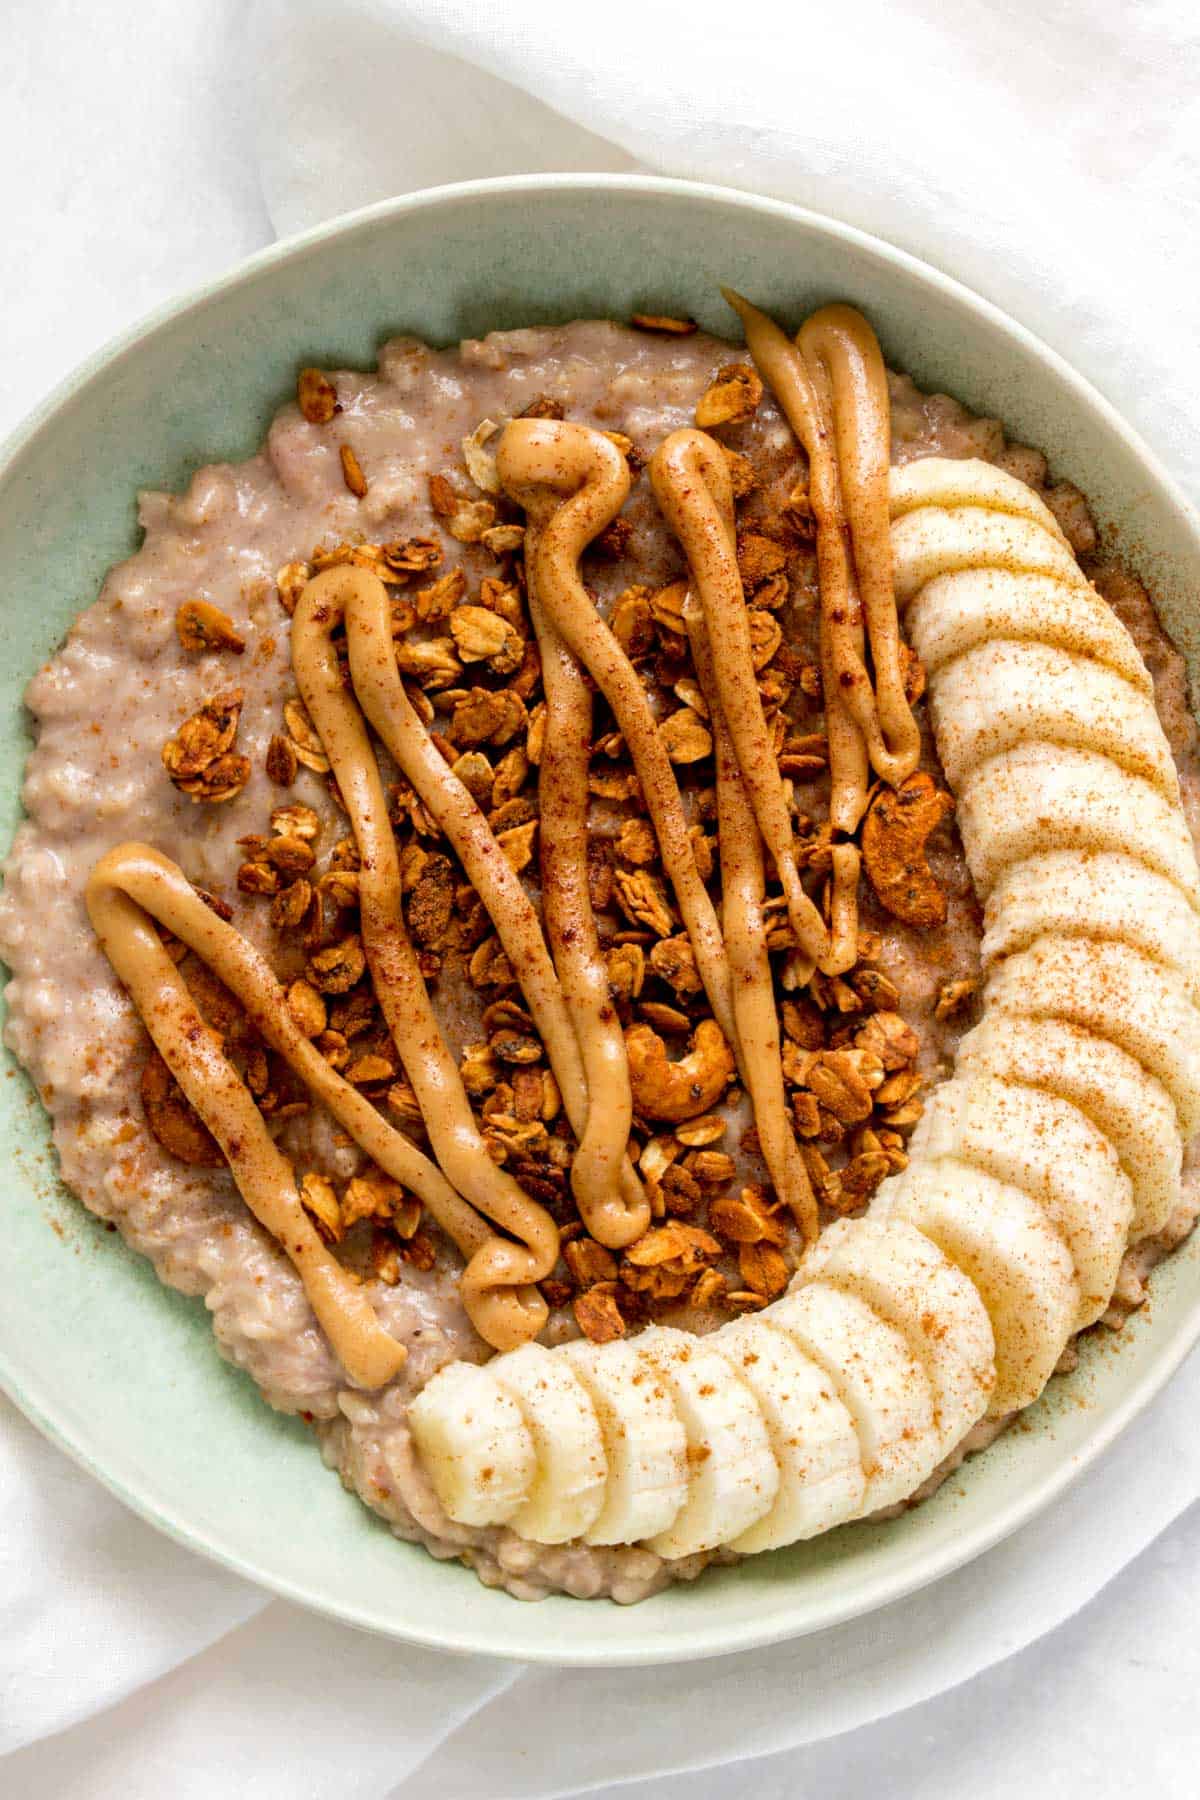 A plate of banana bread oatmeal with sliced bananas, granola, and nut butter.